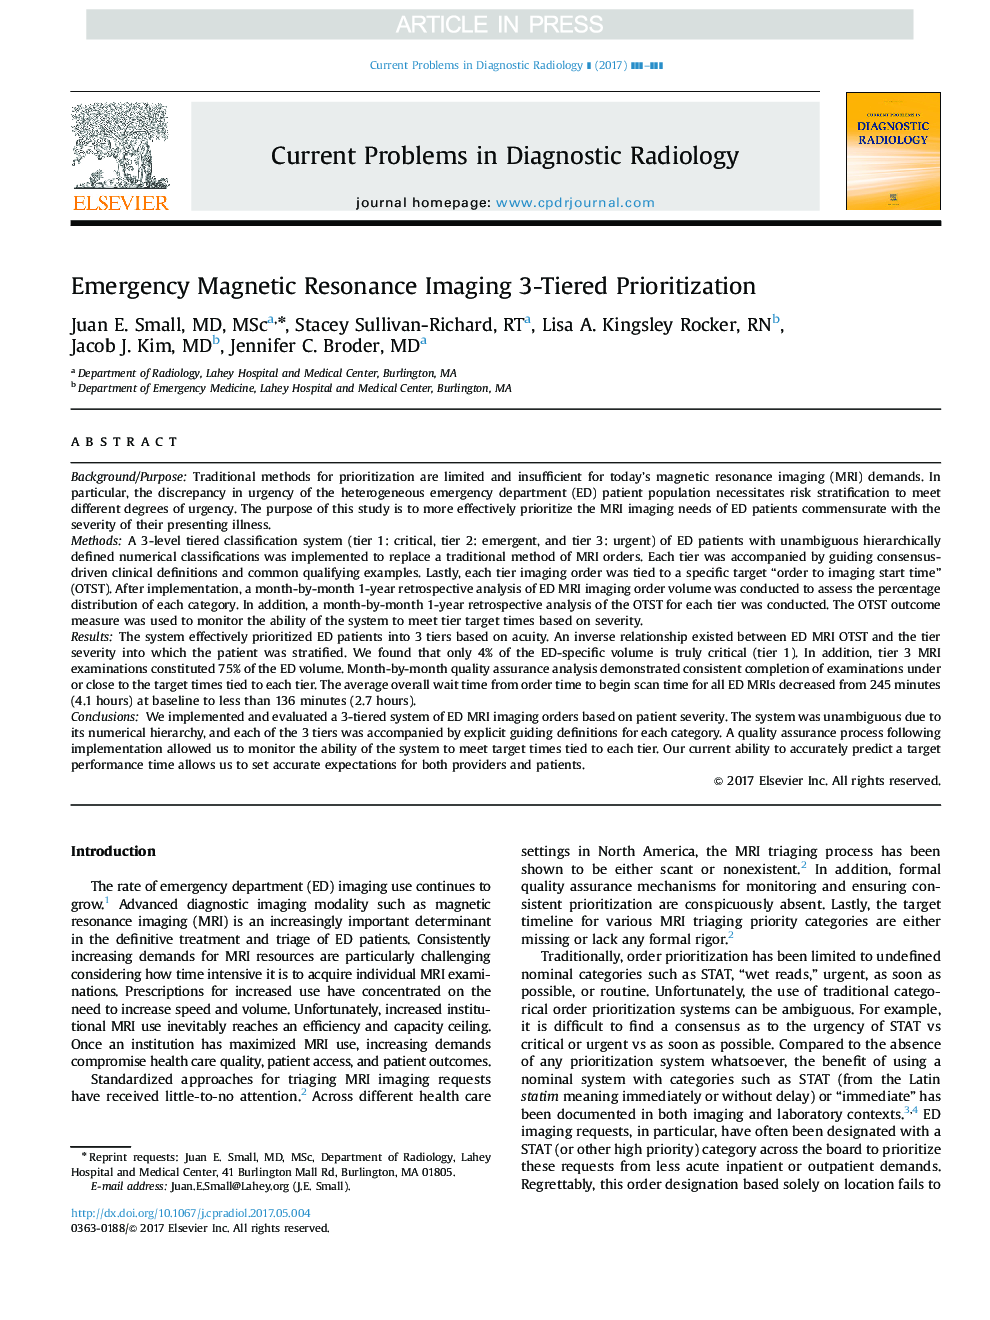 Emergency Magnetic Resonance Imaging 3-Tiered Prioritization